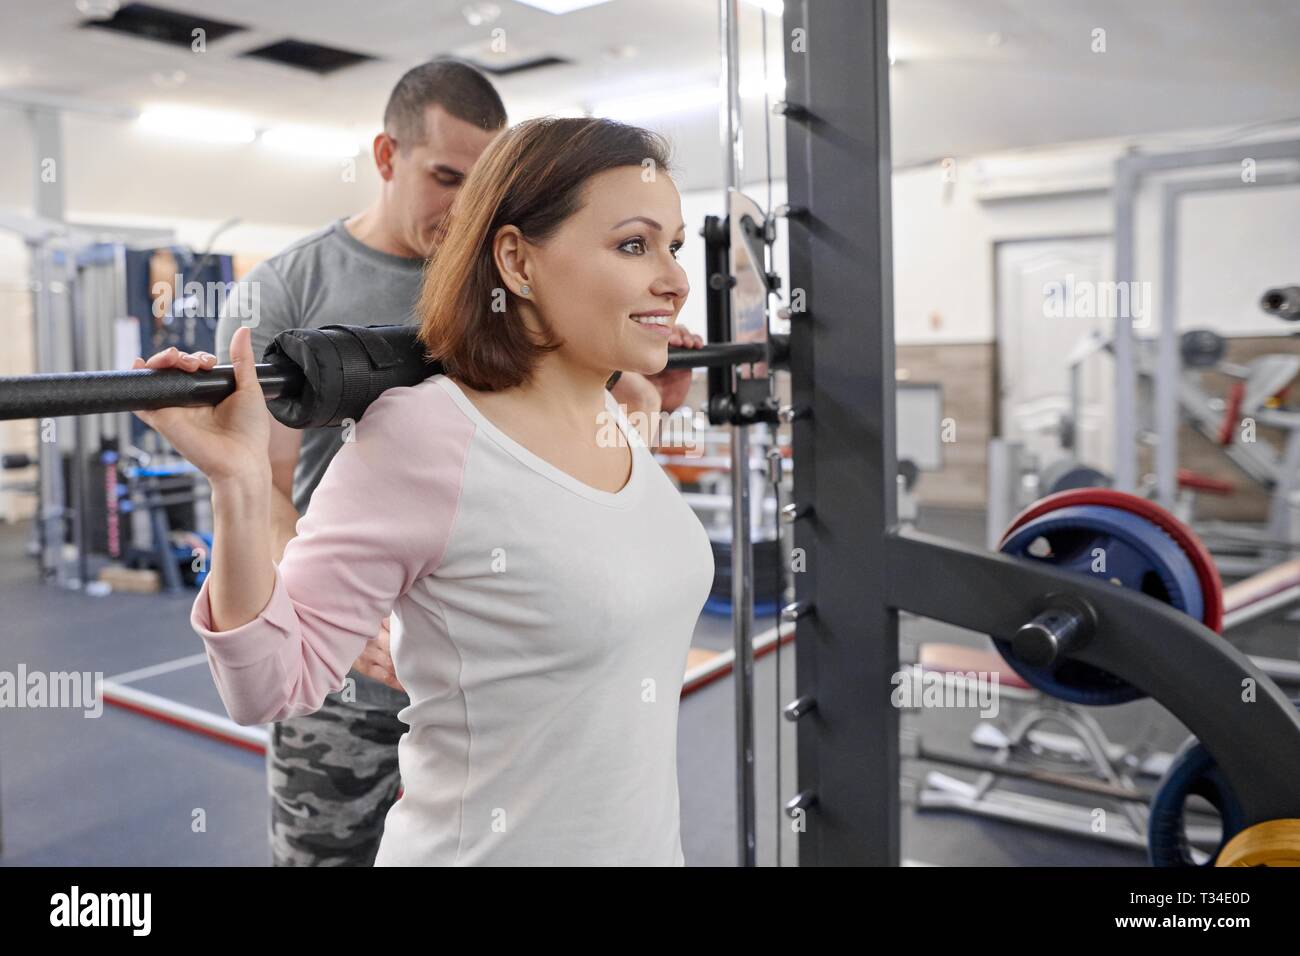 Mature woman doing sport exercises with personal trainer at gym. Male instructor assisting older woman. Stock Photo